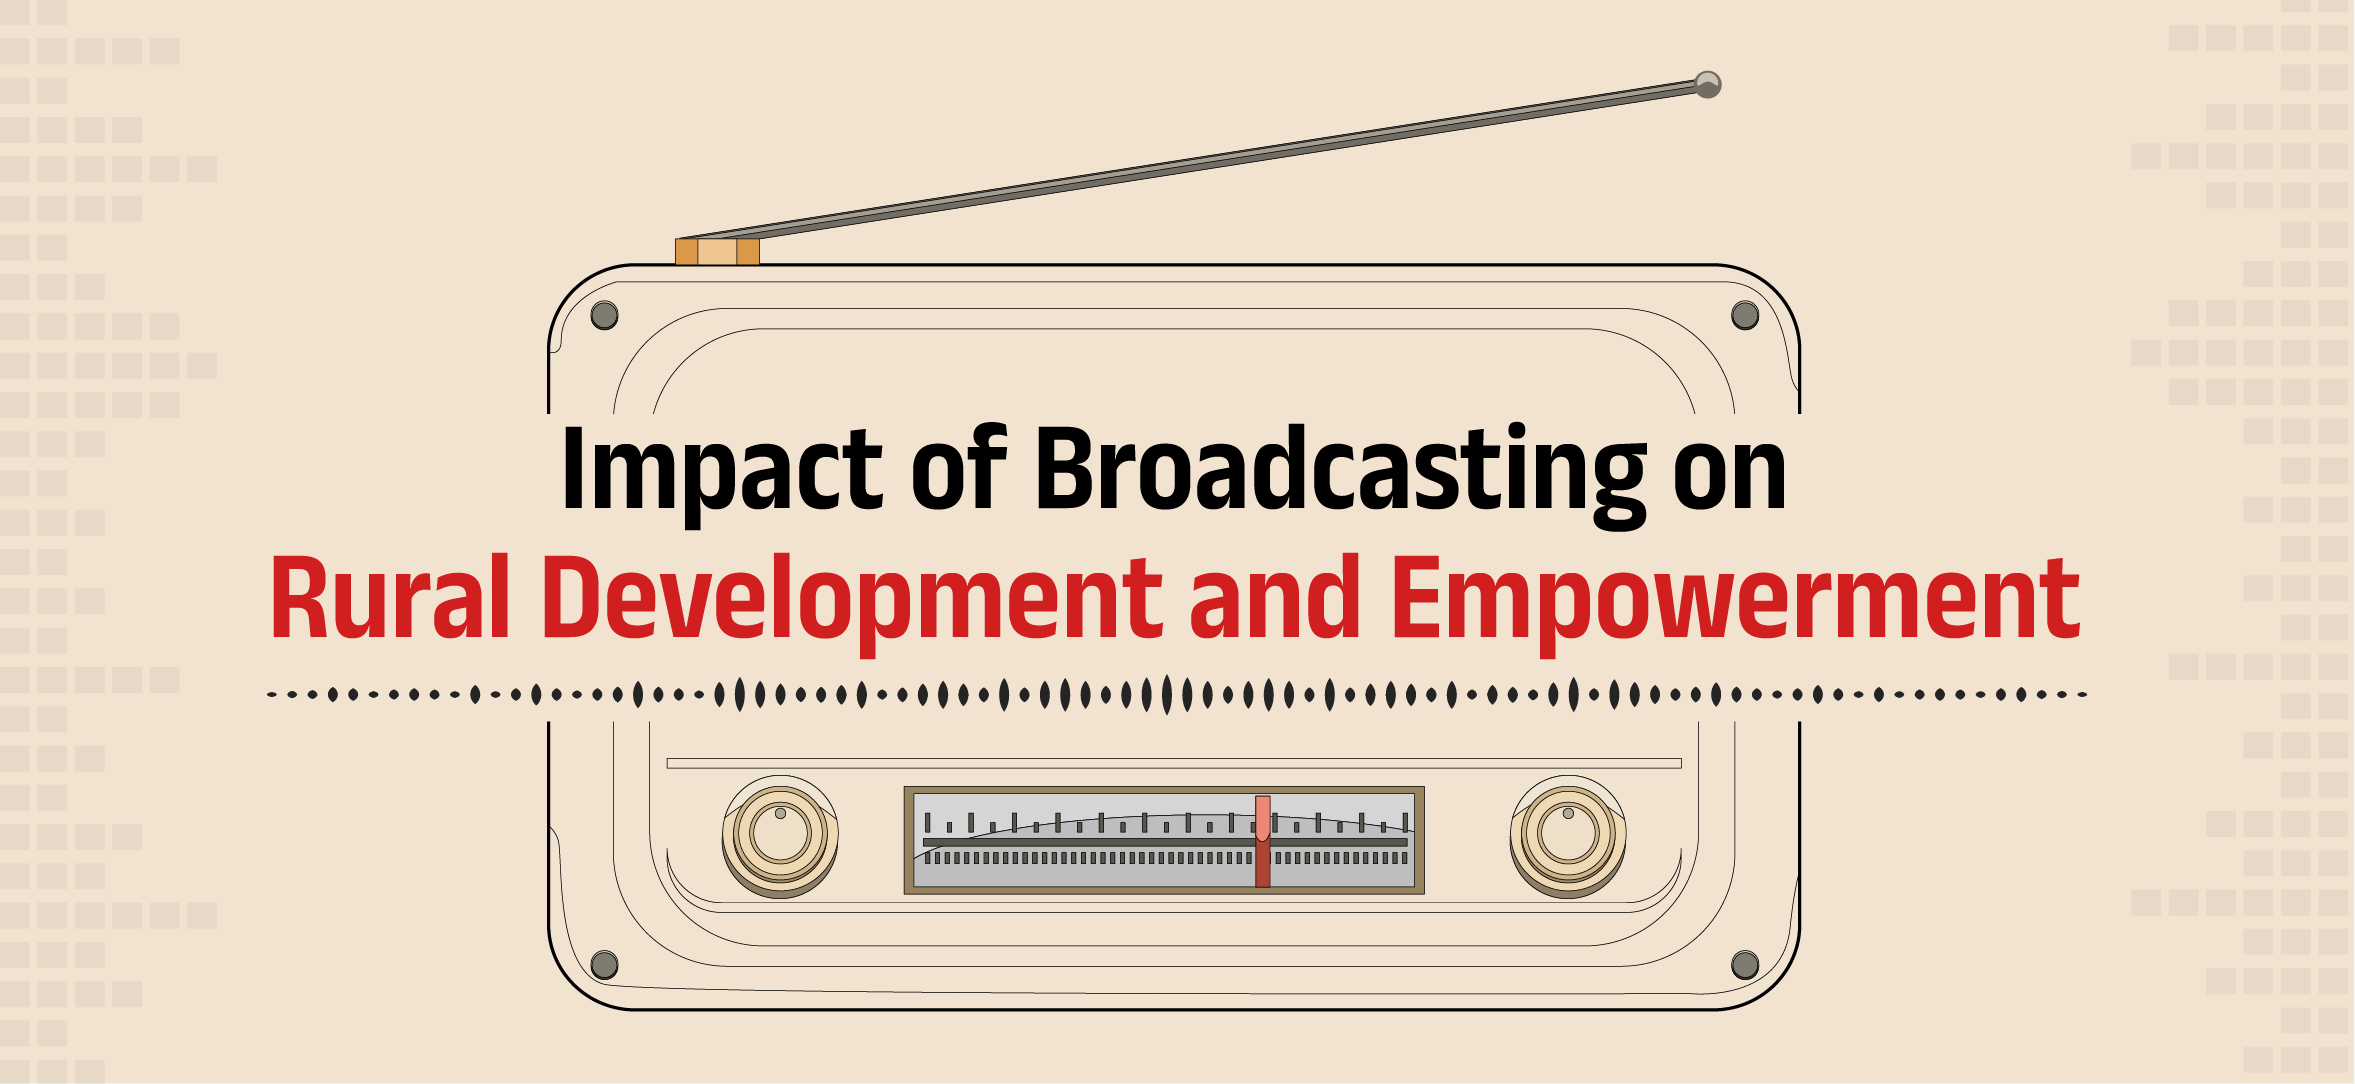 https://www.drishtiias.com/images/blogs/Impact-of-Broadcasting-on-Rural-Development-and-Empowerment.png